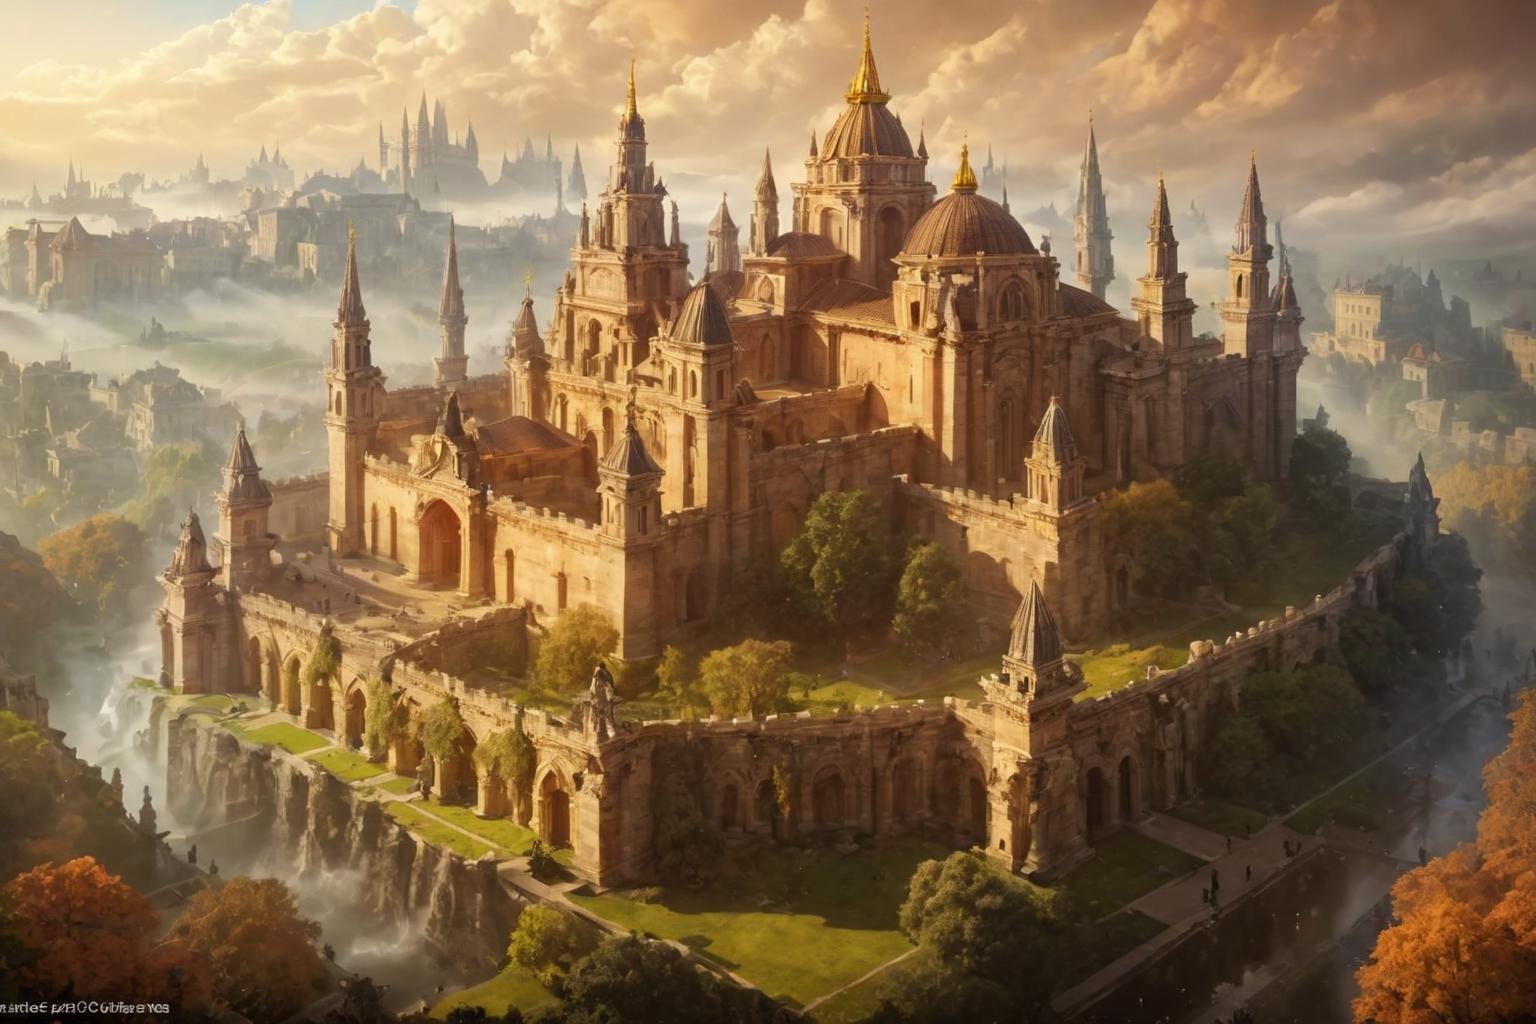 (The main castle,  the center of the kingdom:1.5), (a changing skyline,  towering spires,  thick walls,  and extremely huge scale:1.4).(statue,  monument,  square,  fountain,  cloister,  central axis:1.3), (extra huge Cathedral:1.3), (easy to defend and difficult to attack in the spectacular natural landscape:1.2), (Renaissance,  Neoclassical,  Baroque,  Rococo,  brutalist architecture:1.2), (elegant,  classic:1.2), (dark fantasy style:1.1), (creeping fog:1.1), (rich BROWN and TAN colors:1.2),  (harmonious colors:1.0), more detail XL, Apoloniasxmasbox,<lora:EMS-281647-EMS:1.000000>,<lora:EMS-61413-EMS:0.200000>,<lora:EMS-246897-EMS:0.200000>